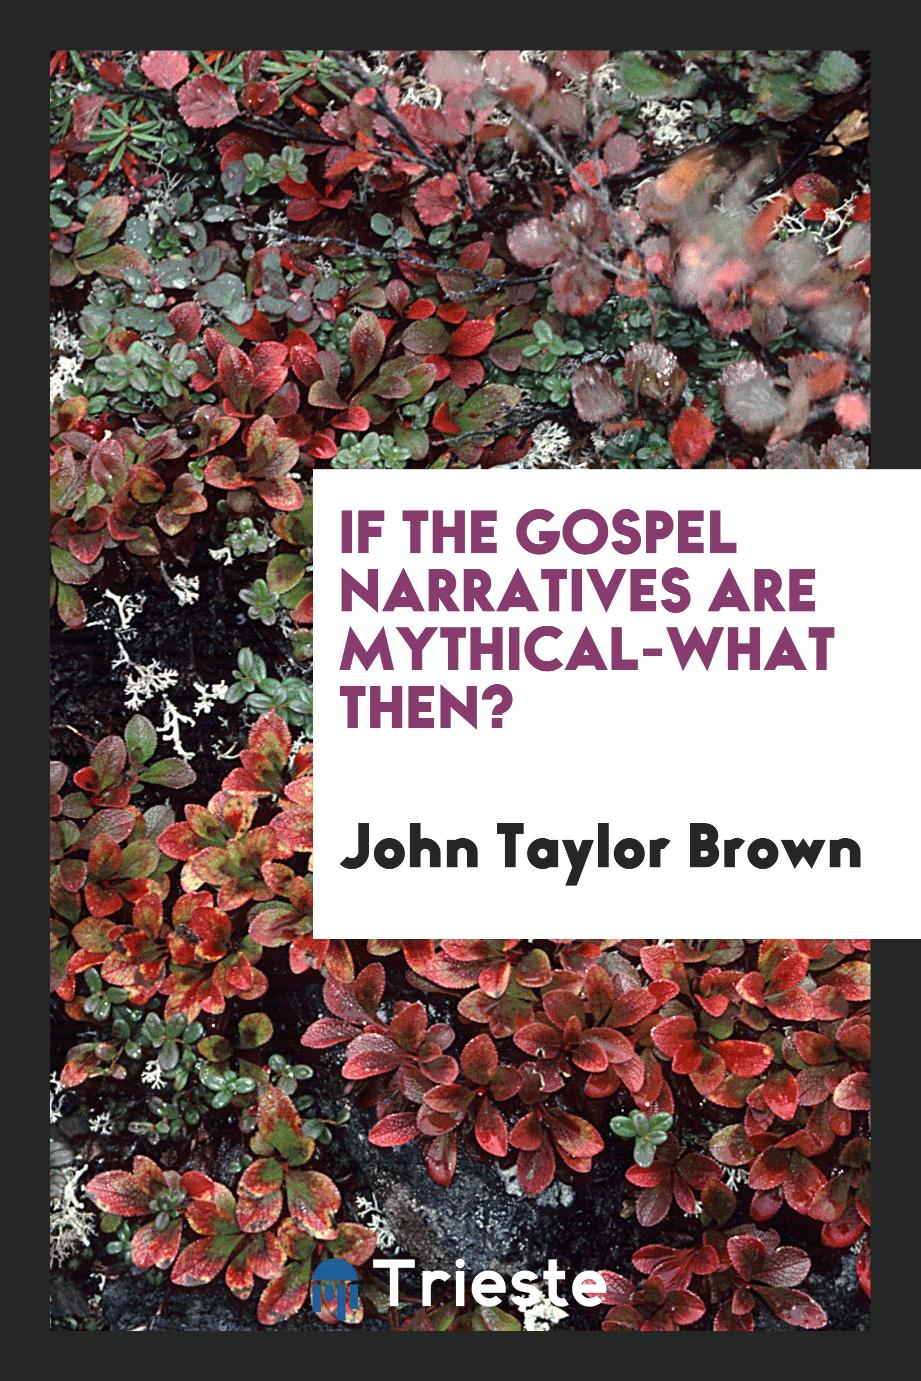 If the Gospel narratives are mythical-what then?